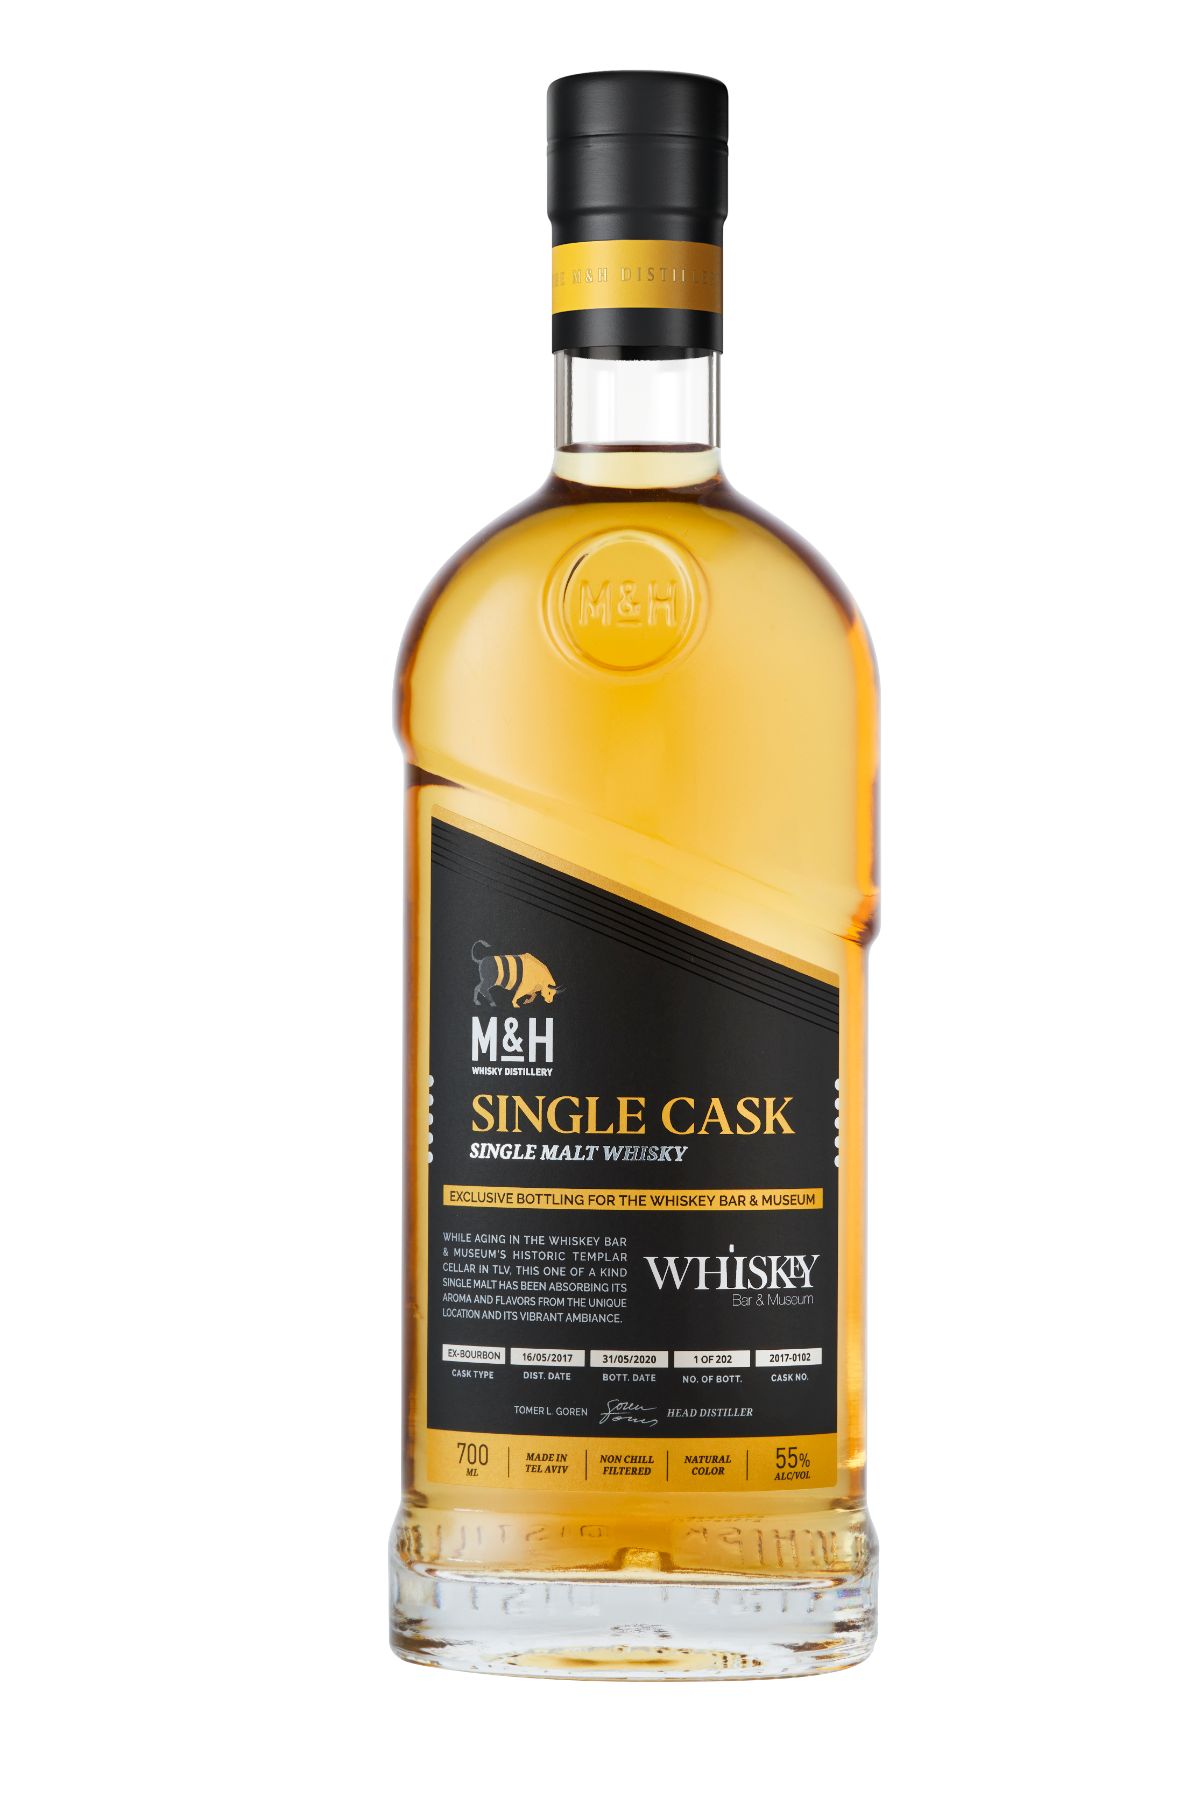 M&H Single Cask. Limited Edition